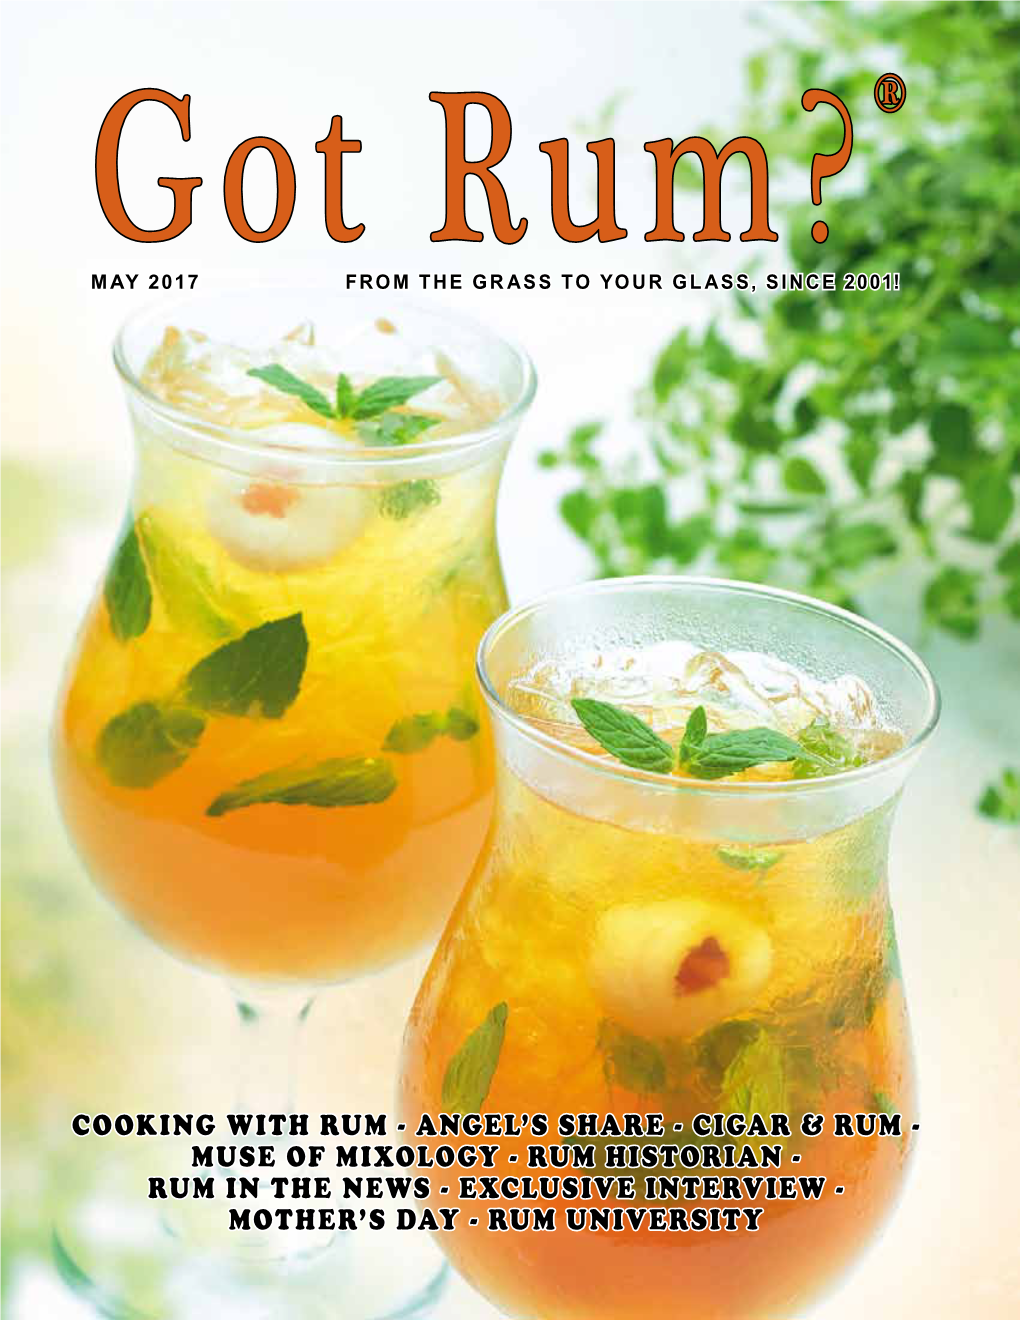 MUSE of MIXOLOGY - RUM HISTORIAN - RUM in the NEWS - EXCLUSIVE INTERVIEW - MOTHER’S DAY - RUM UNIVERSITY 6